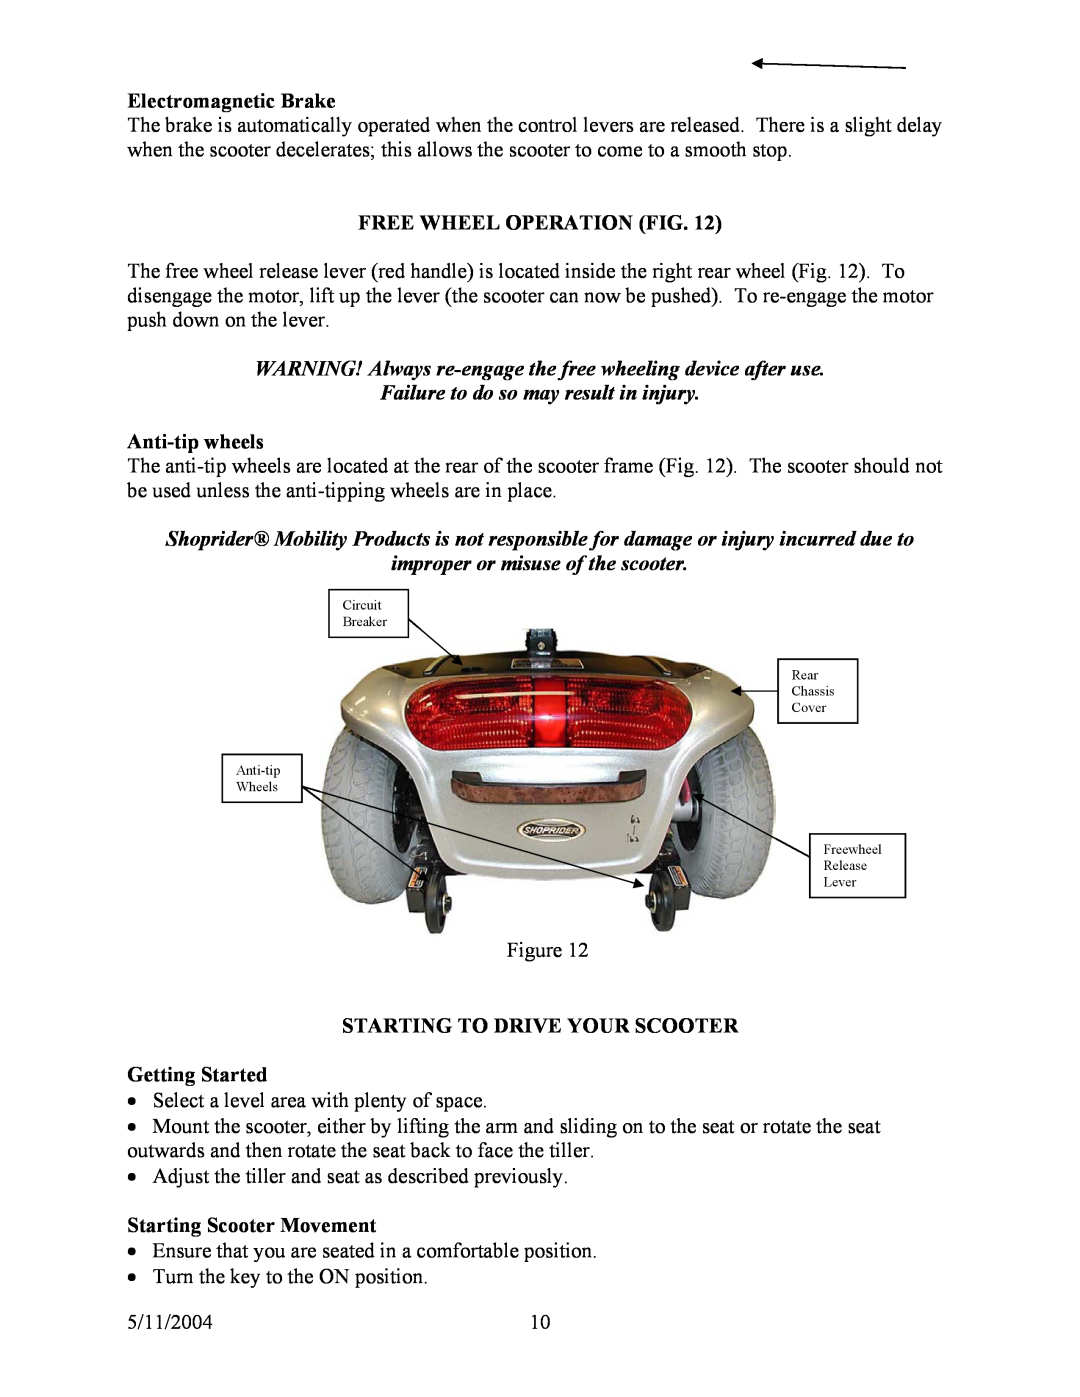 Shoprider (888B-4) Electromagnetic Brake, Free Wheel Operation Fig, Failure to do so may result in injury, Anti-tip wheels 